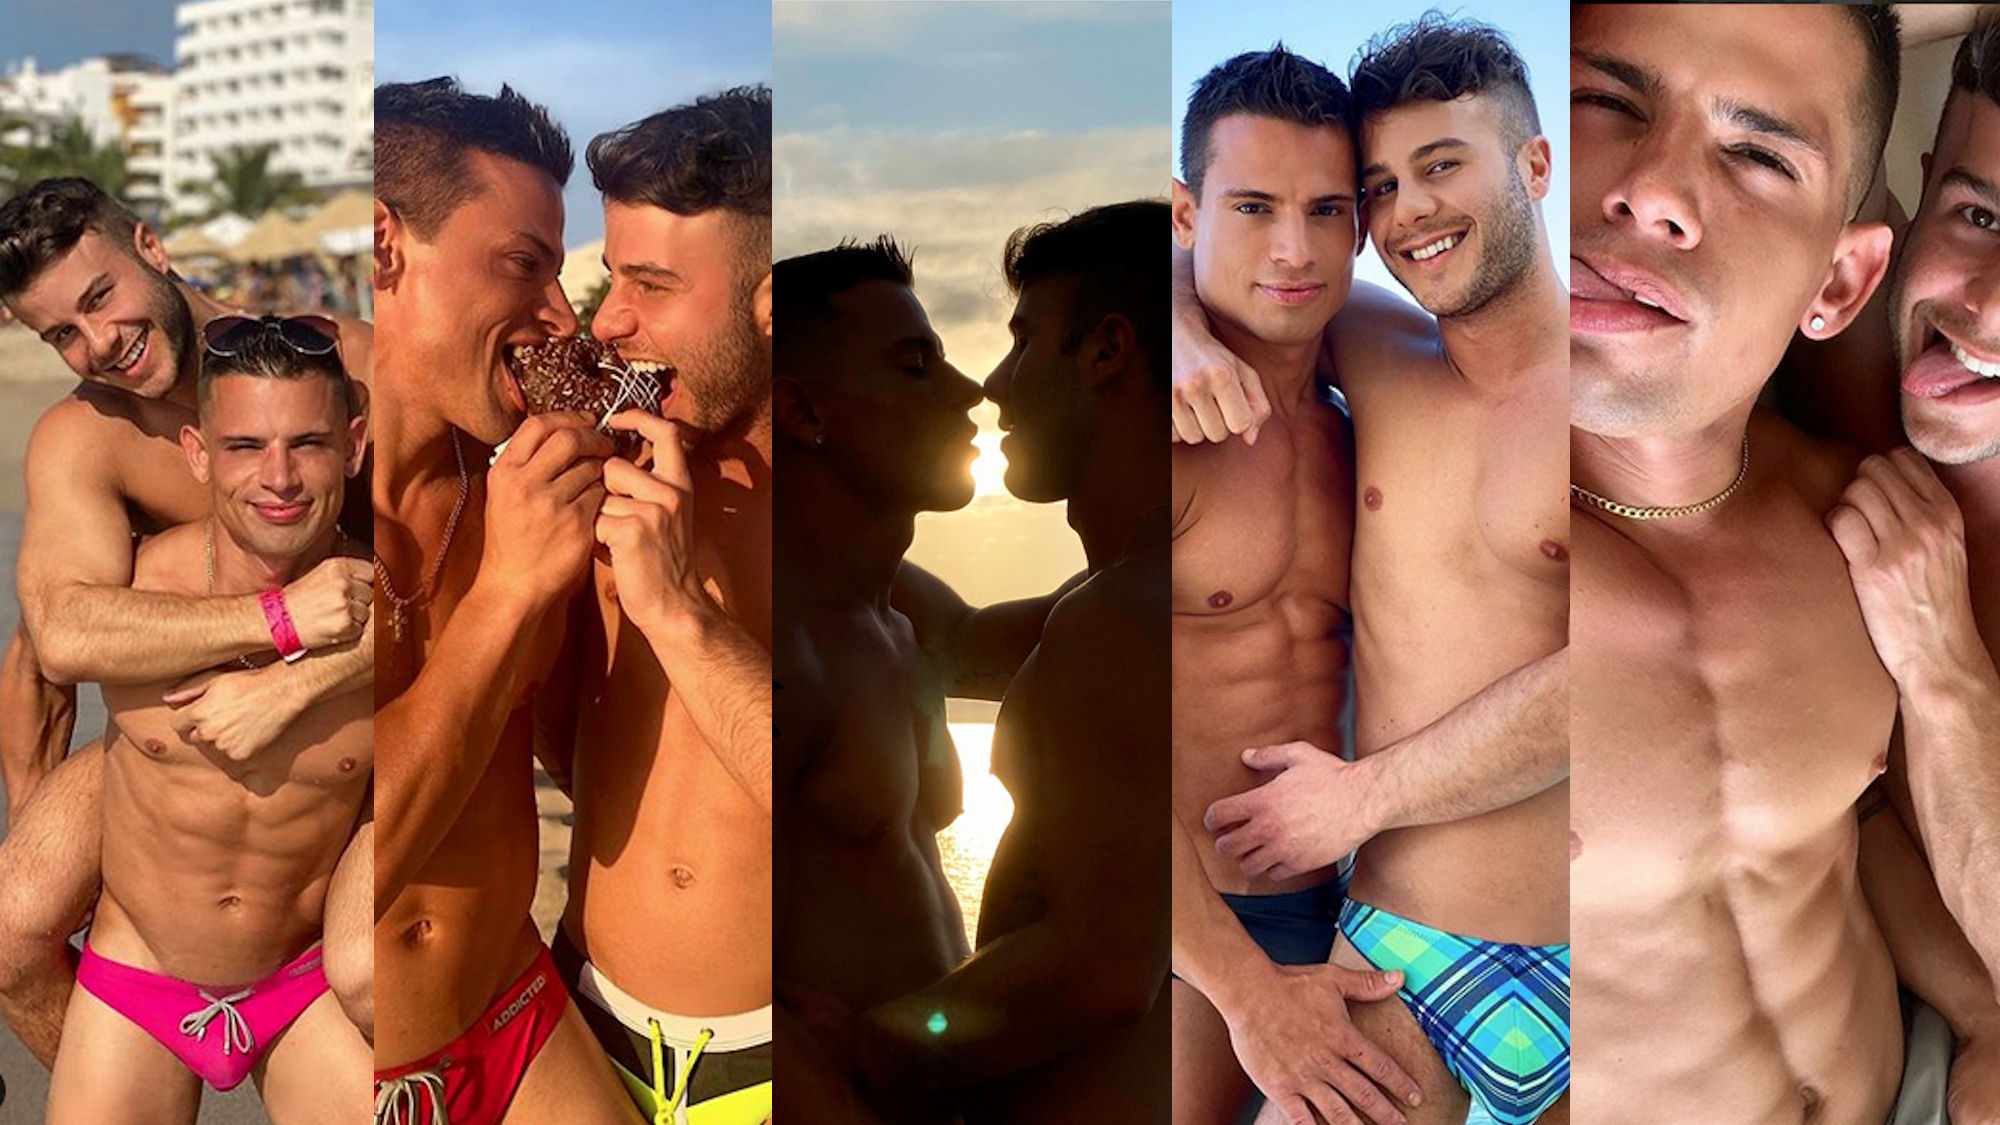 Gay Porn Power Couple: The Super Cute Courtship of Allen King & Brent  Everett - TheSword.com